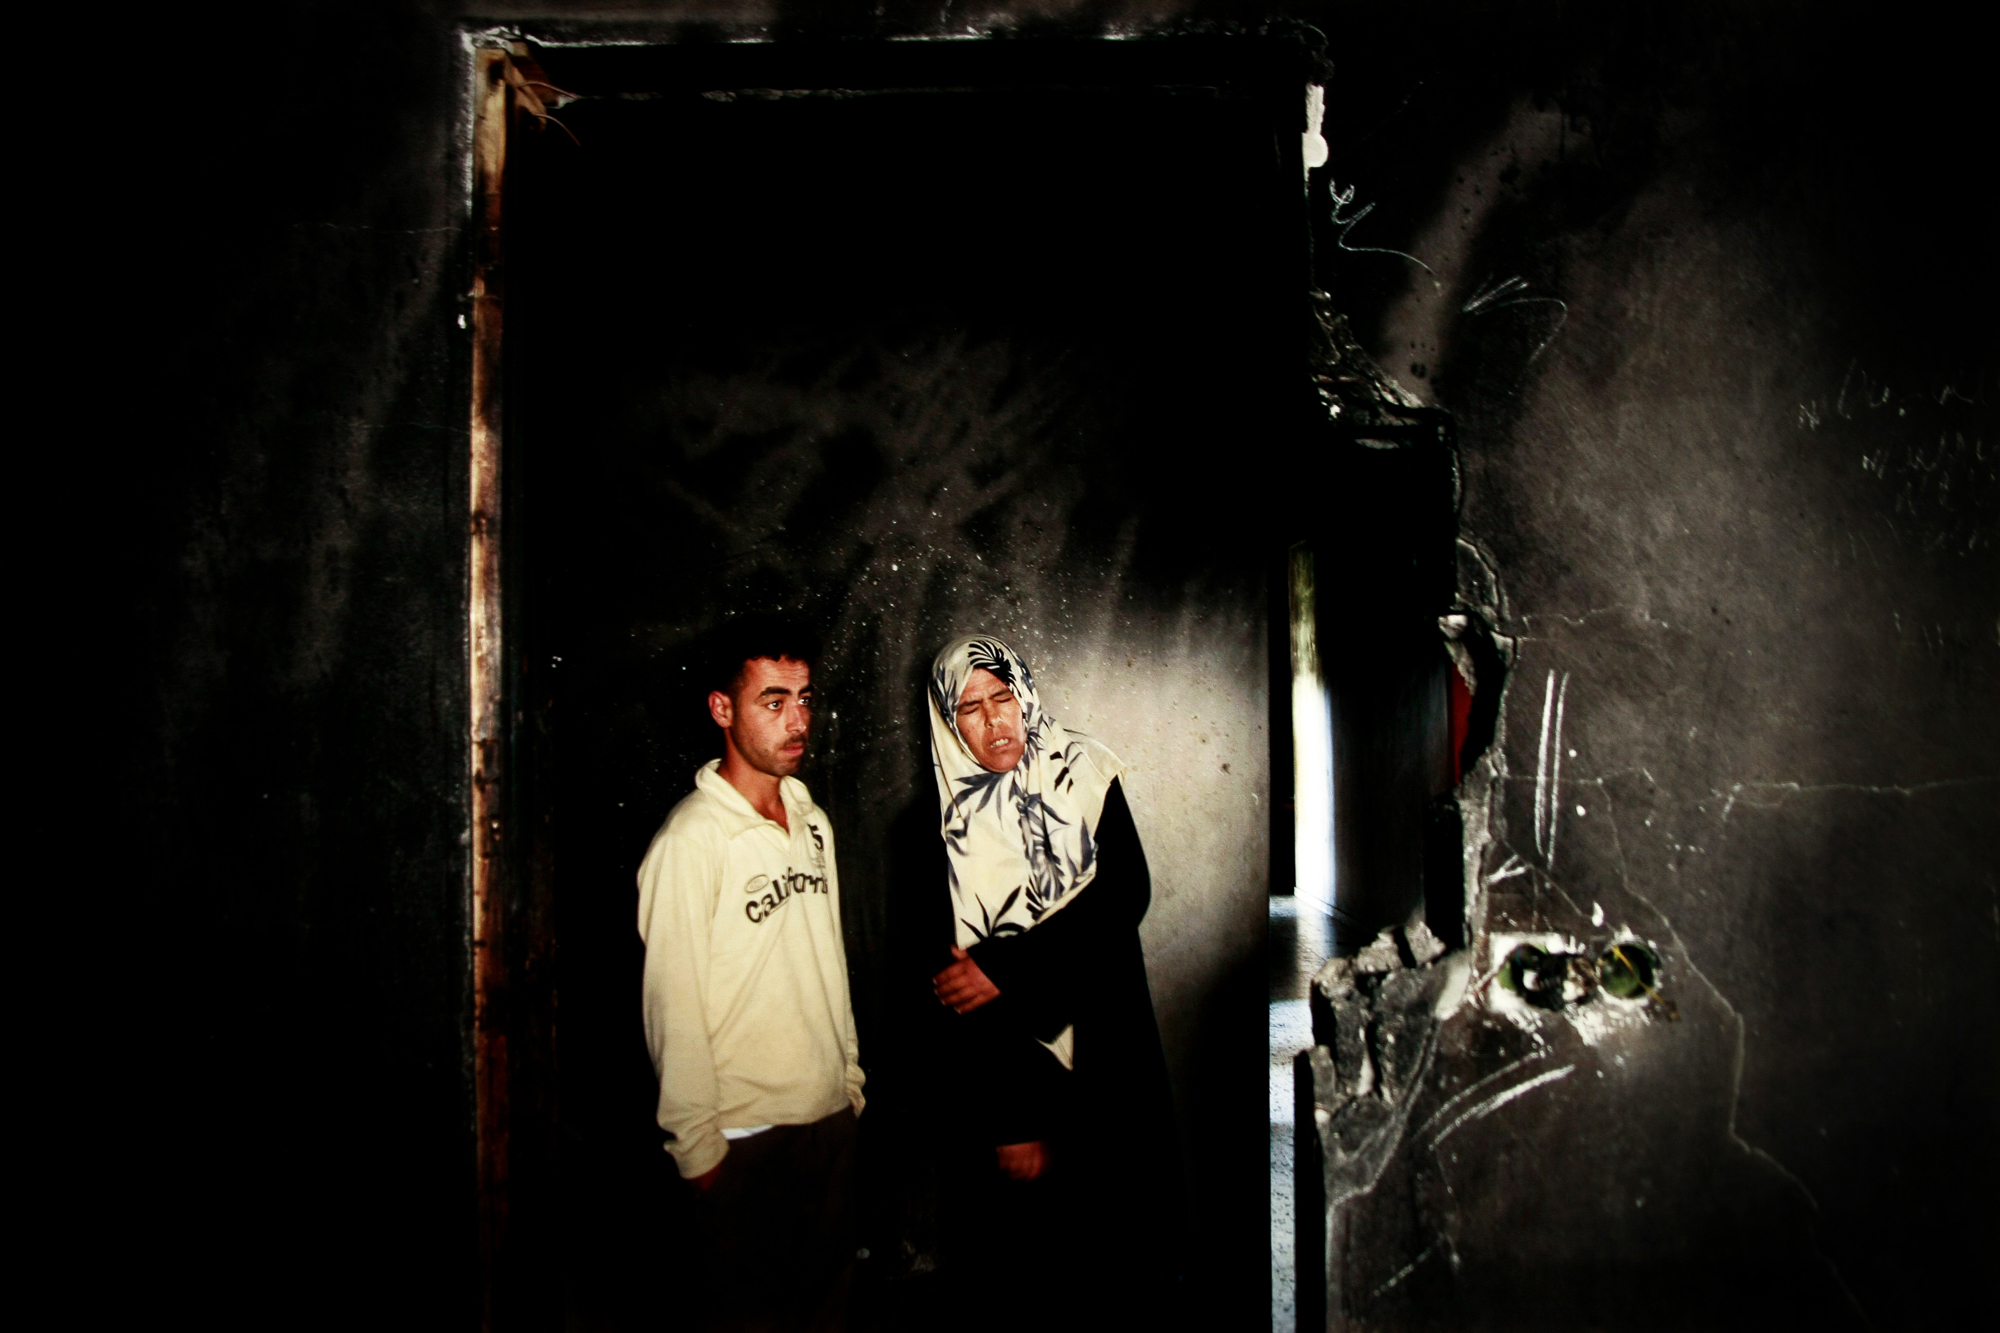 Sabha Abu Halima and her son Ahmed Abu Halima in their house, which was destroyed by fire from phosphoric bombs dropped by Israel during Gaza War. Photo: Eman Mohammed 